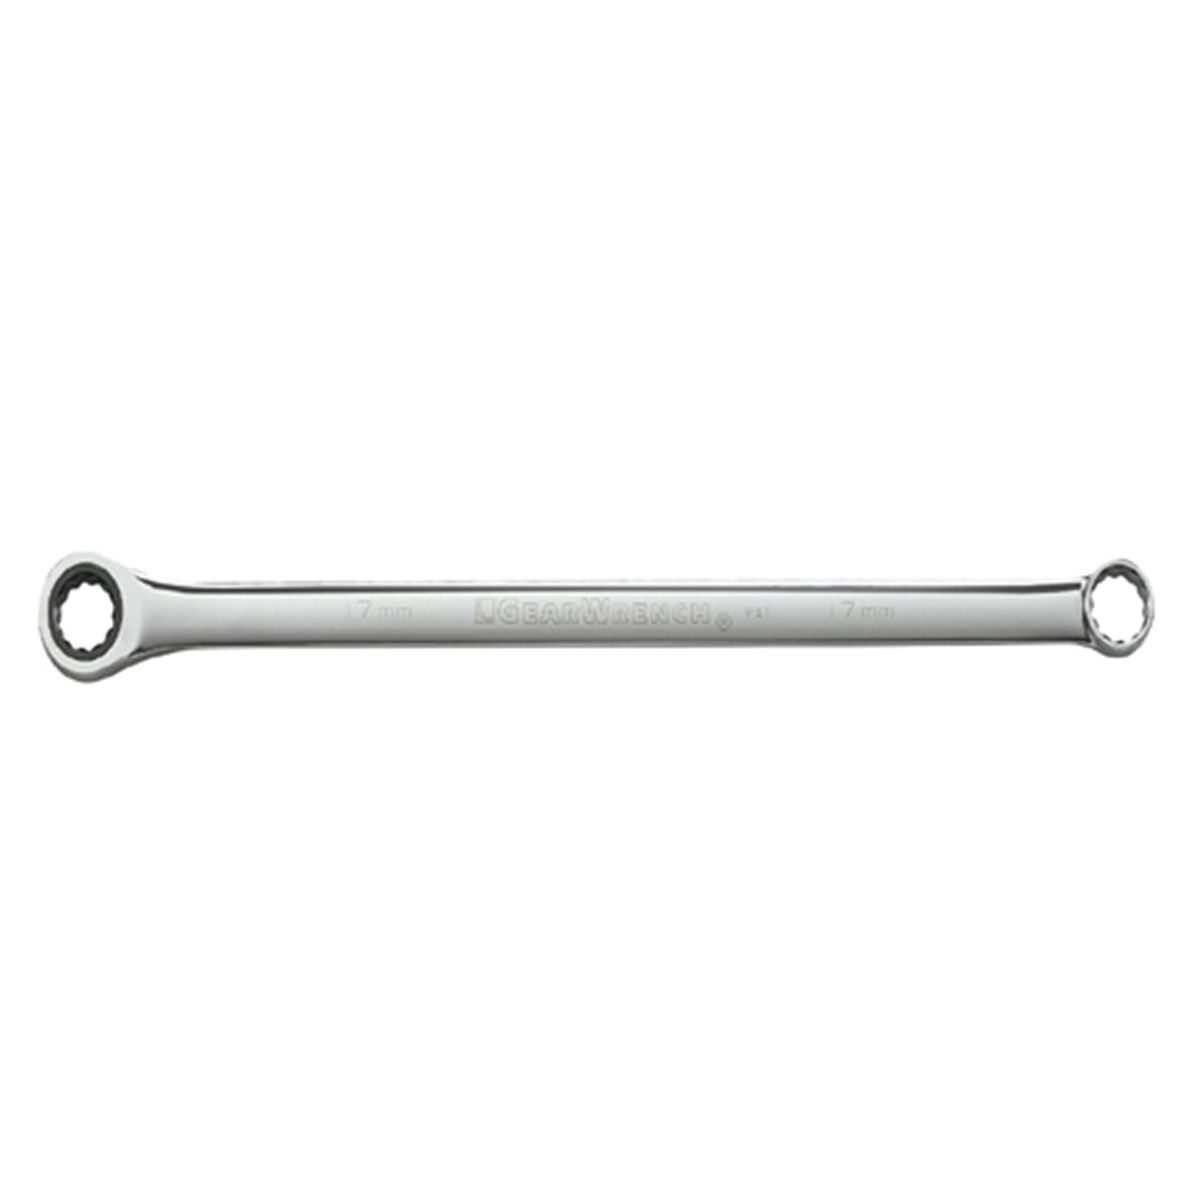 XL GearBox(TM) Double Box Ratcheting Wrench - 13mm